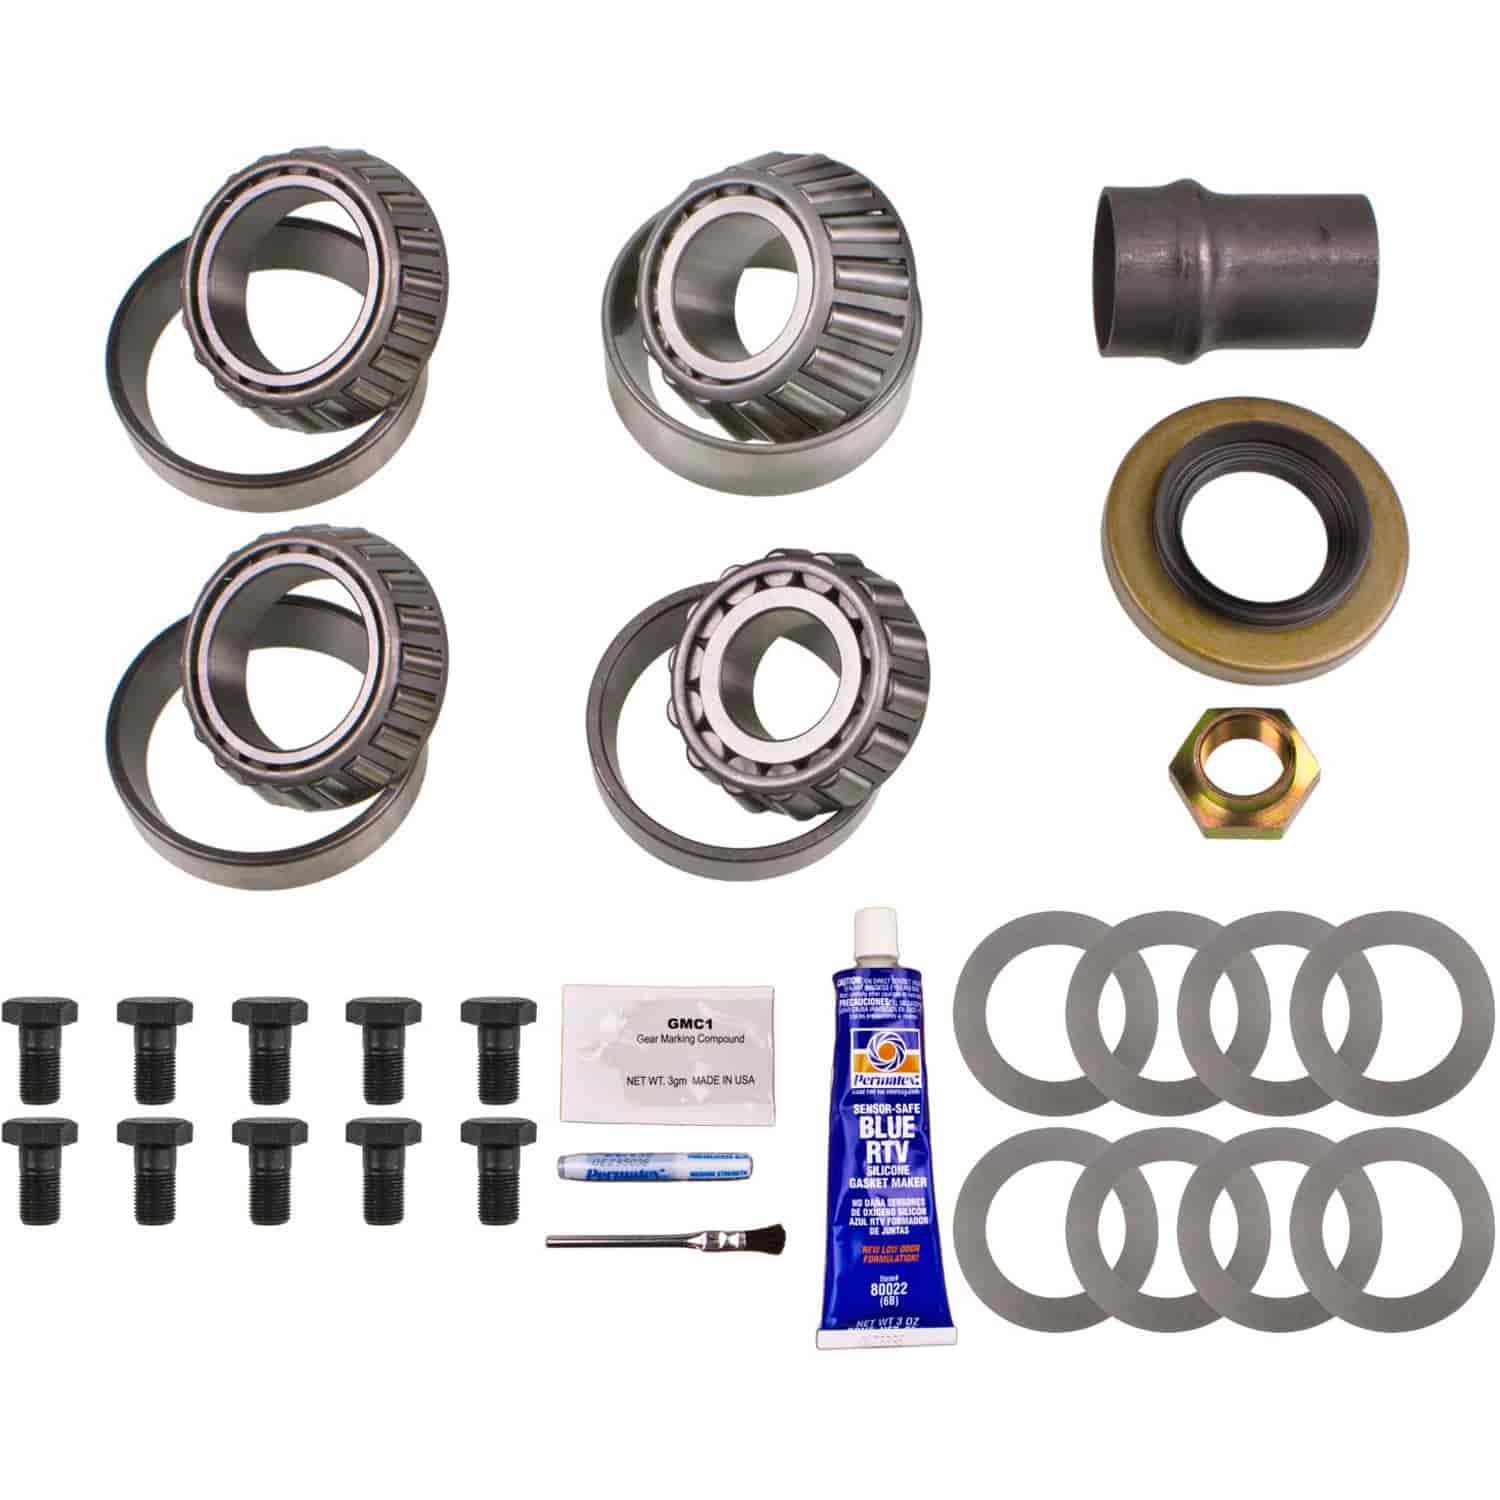 Excel; Full Ring And Pinion Install Kit; Fits Toyota 7.8in.; Incl. Cvr Gskt/Bolts/Washers/Crush Slee